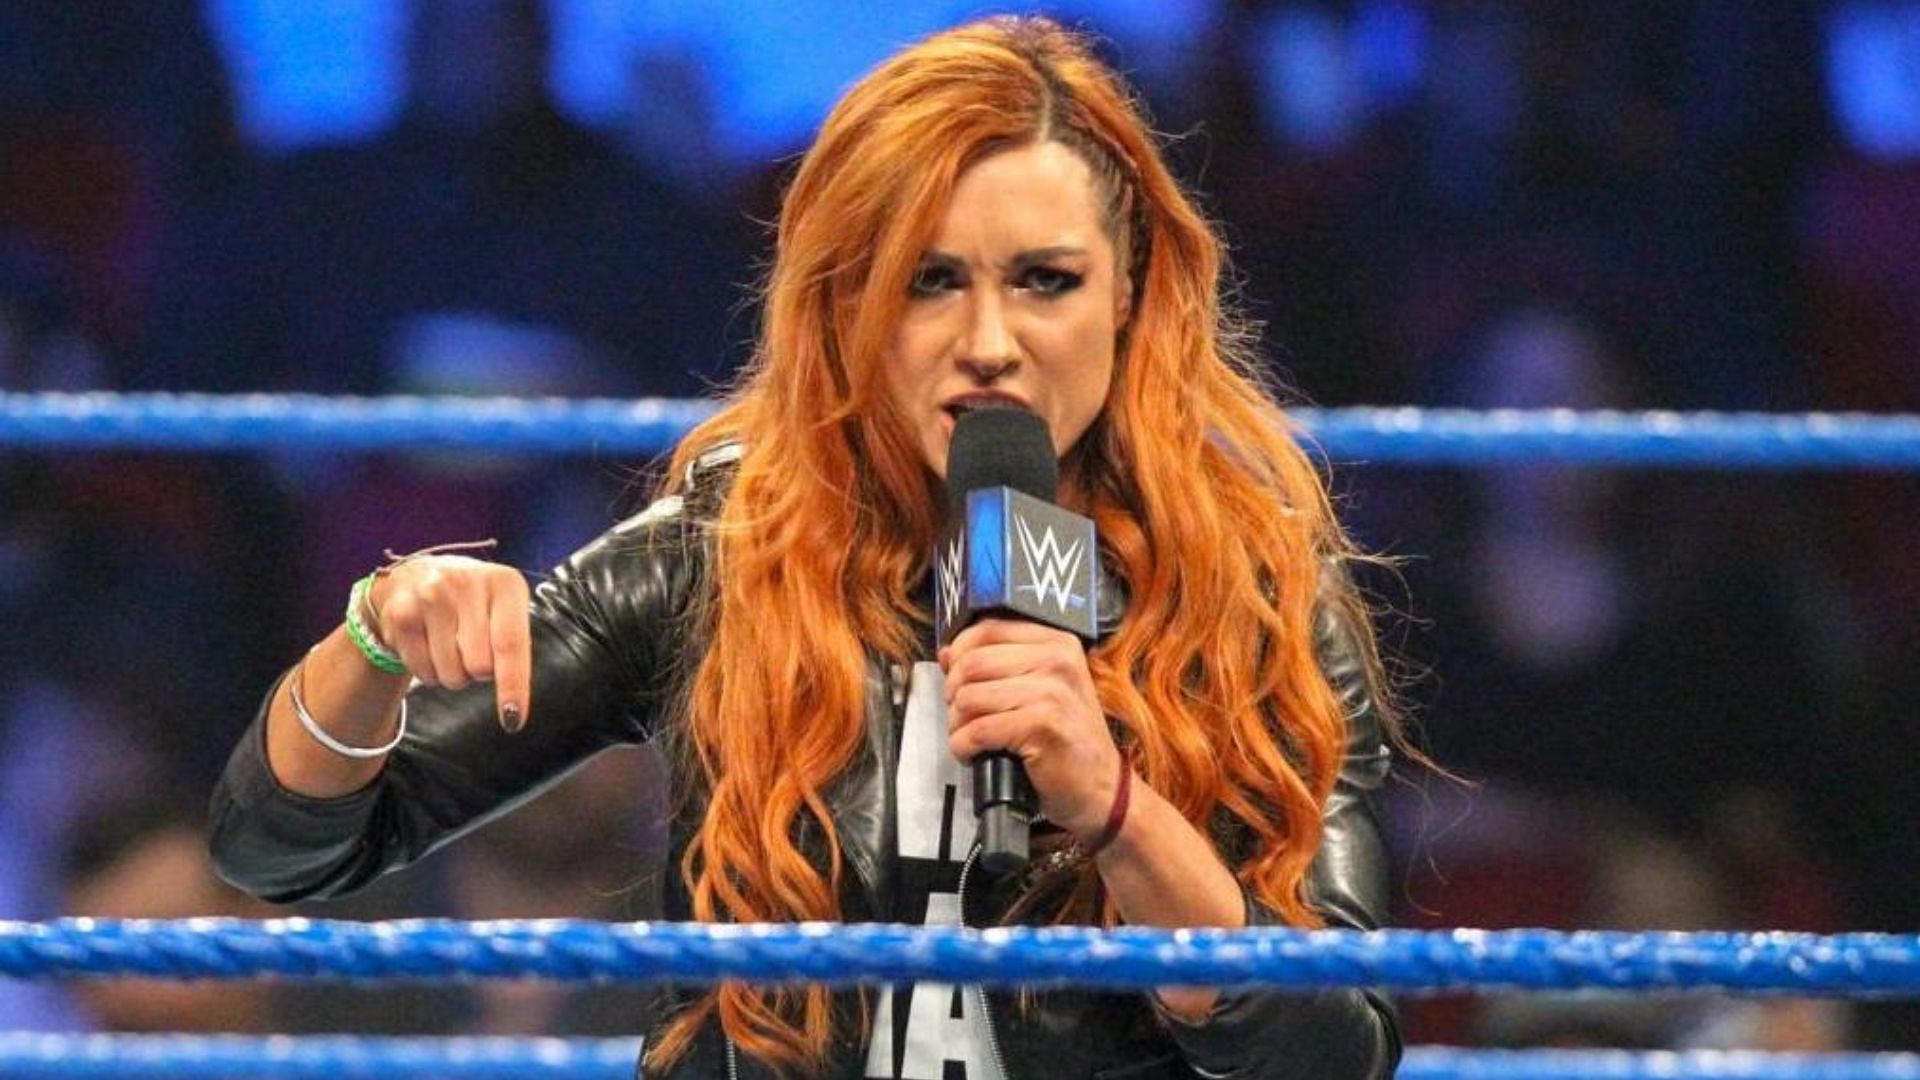 Becky Lynch was in action at Survivor Series WarGames and secured the win for her team